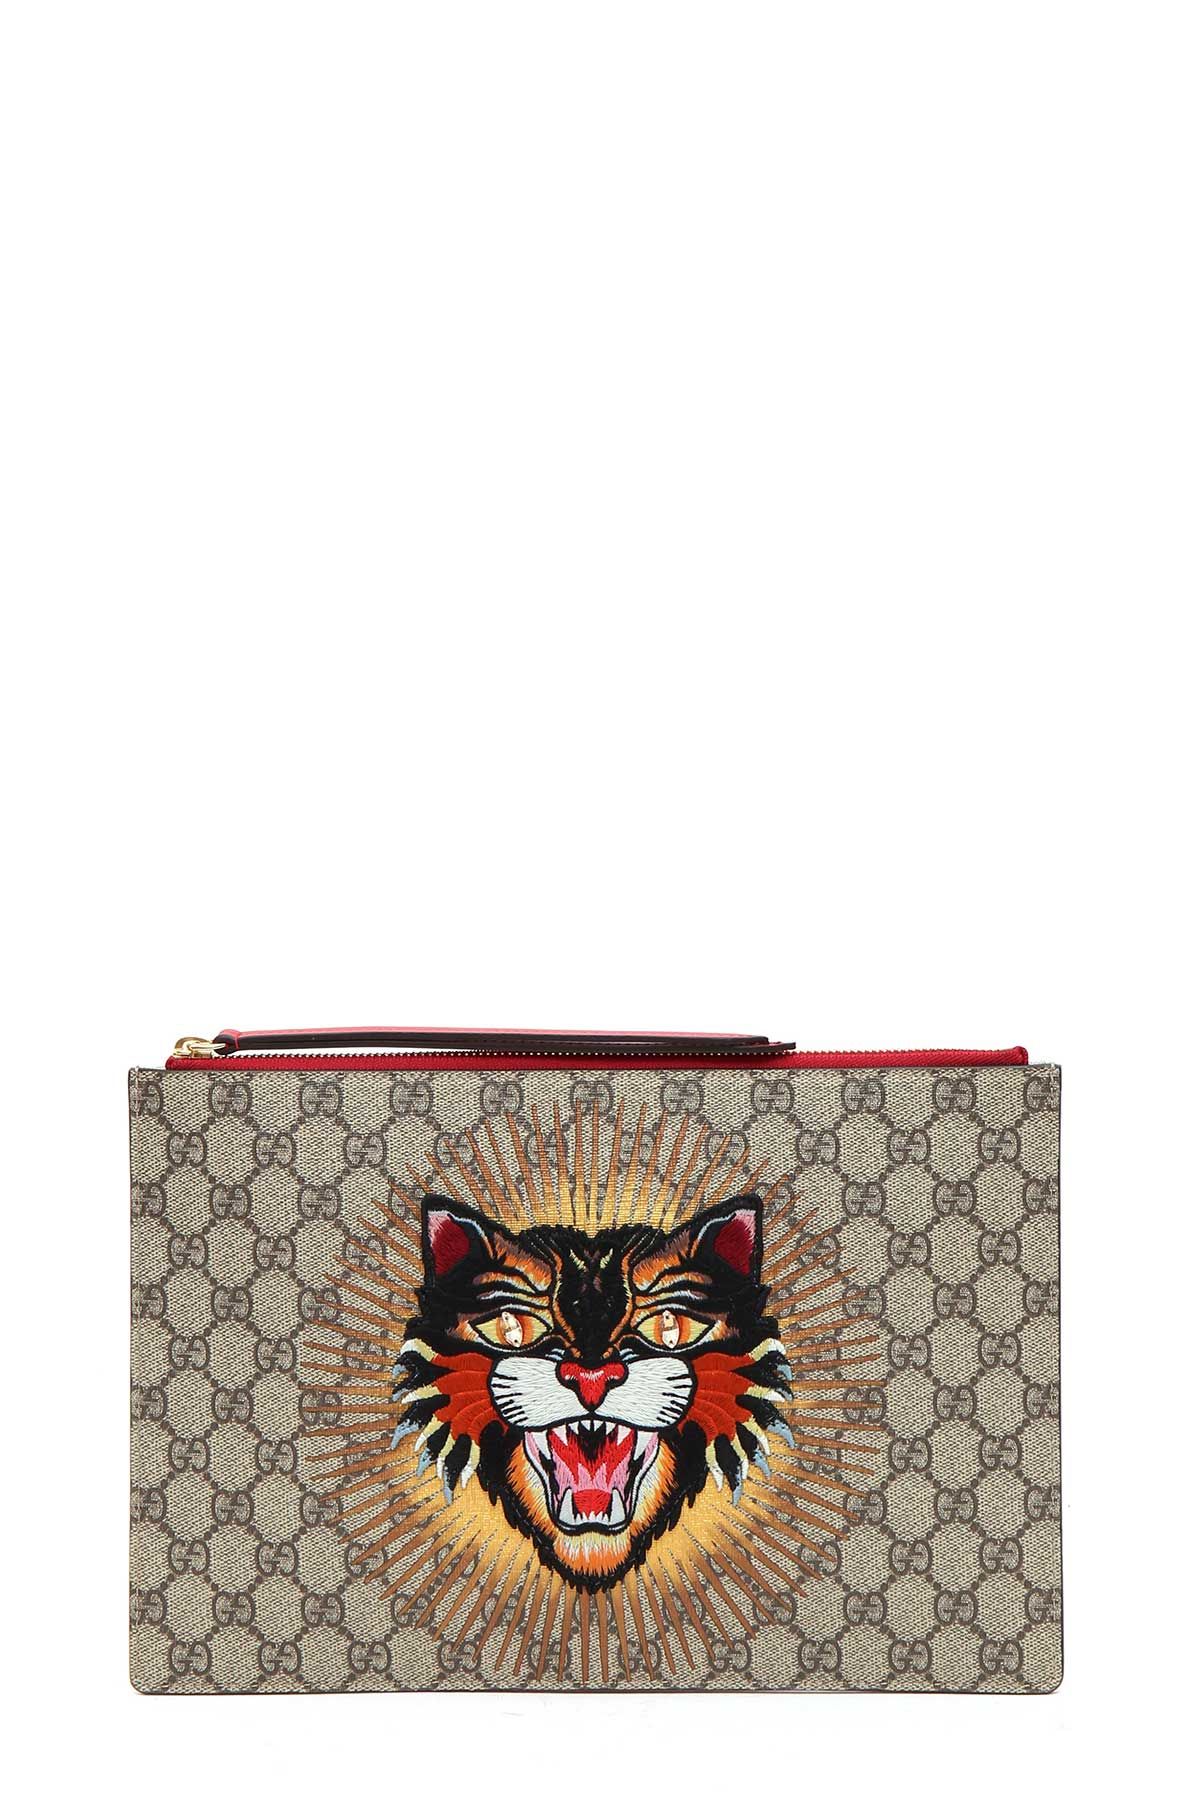 GUCCI Sequin Angry Cat Gg Supreme Pouch in Beige-Multi | ModeSens